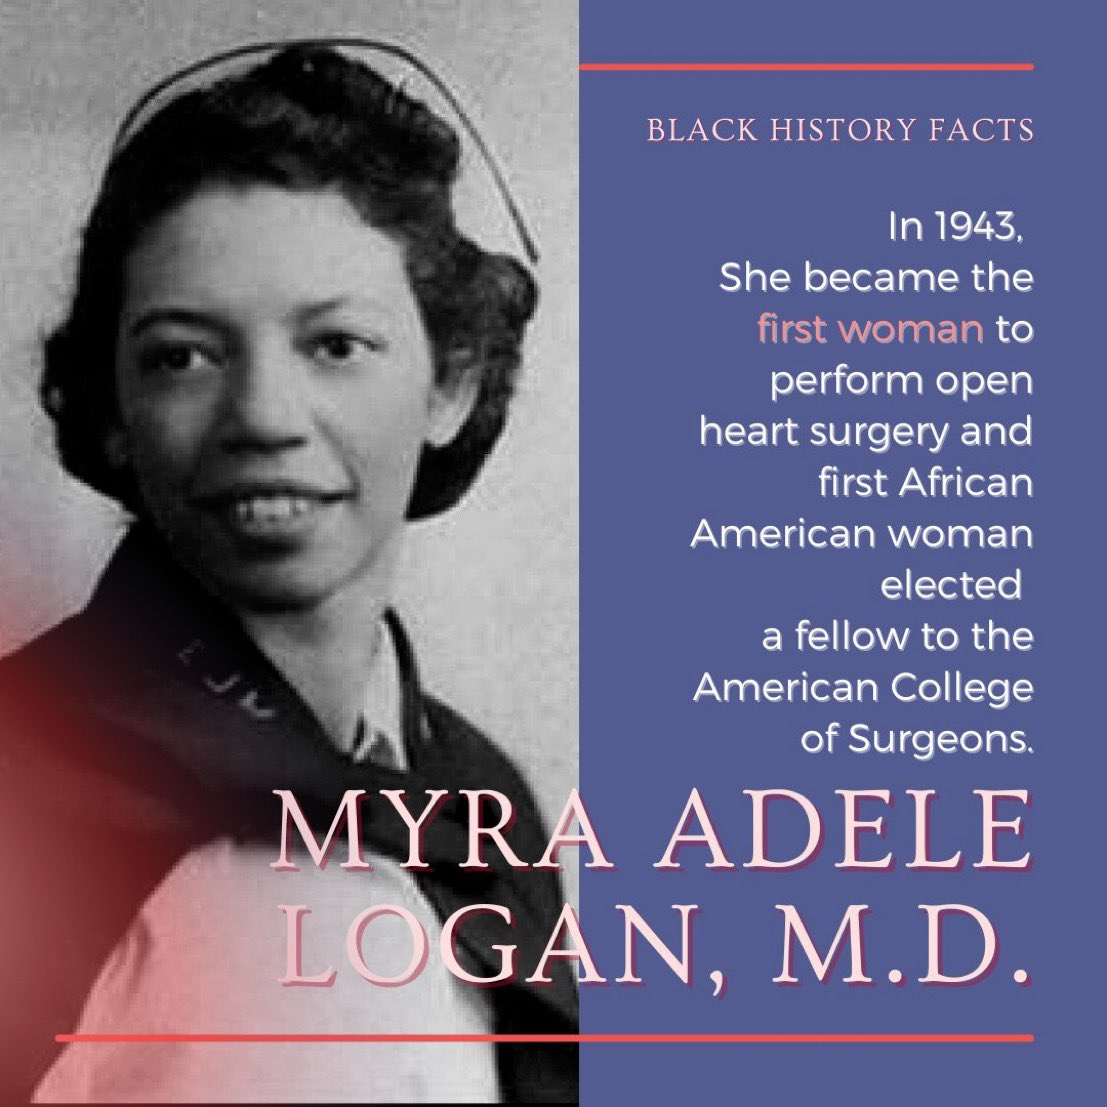 Did you know the first woman to ever perform an open heart surgery was Black? She also developed a more accurate x-ray process that detected breast cancer tumors earlier. Myra’s research saved countless lives.👏🏾 #BlackExcellence #BlackHistoryMonth